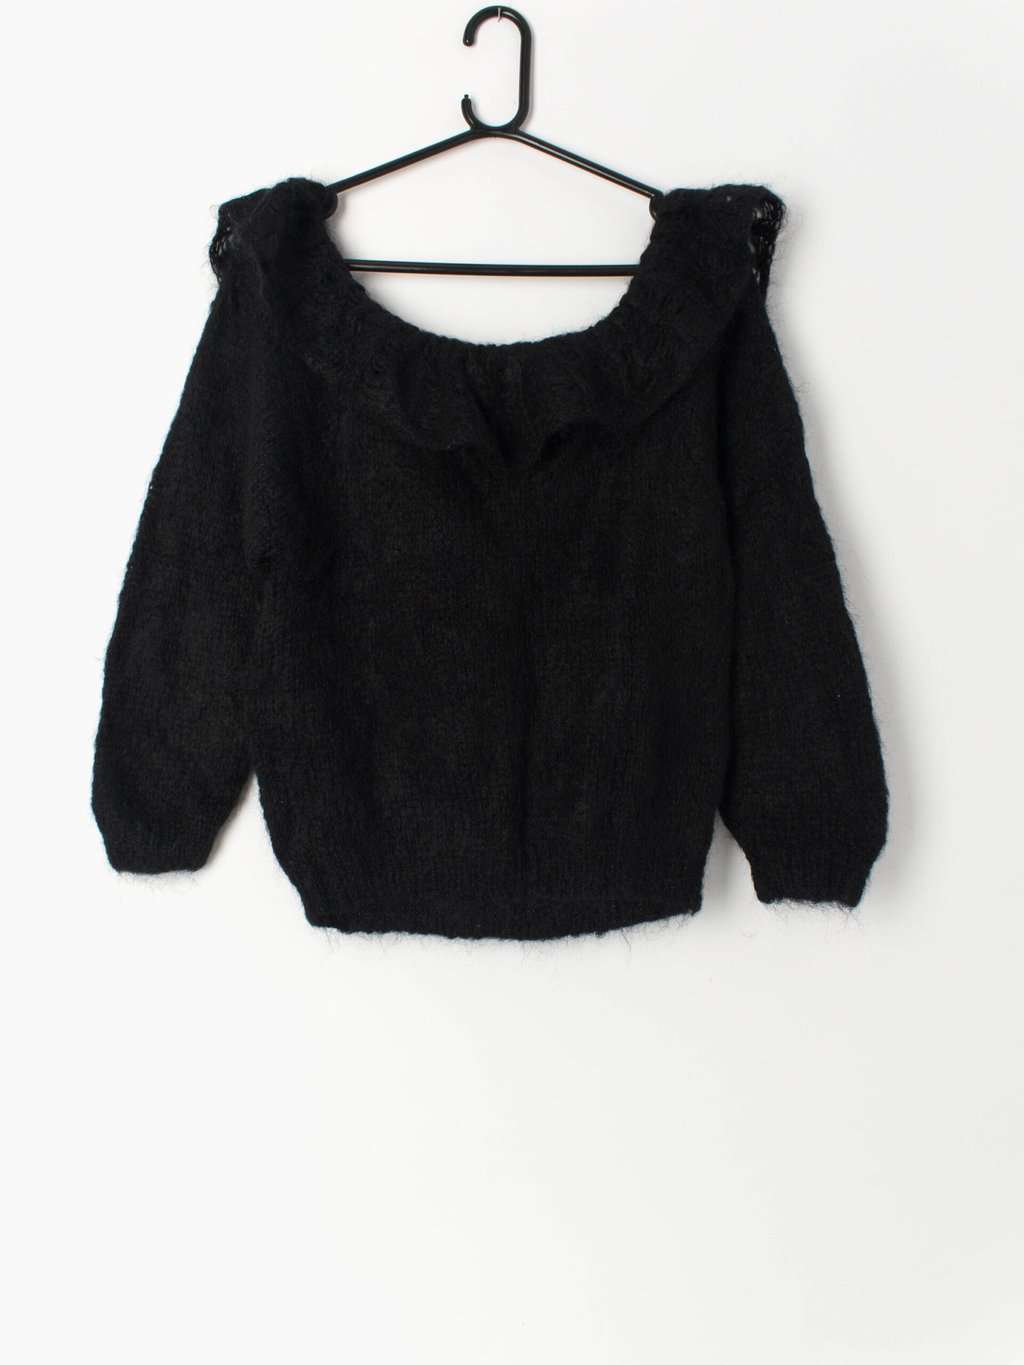 Vintage black mohair jumper with large ruffle collar hand knitted